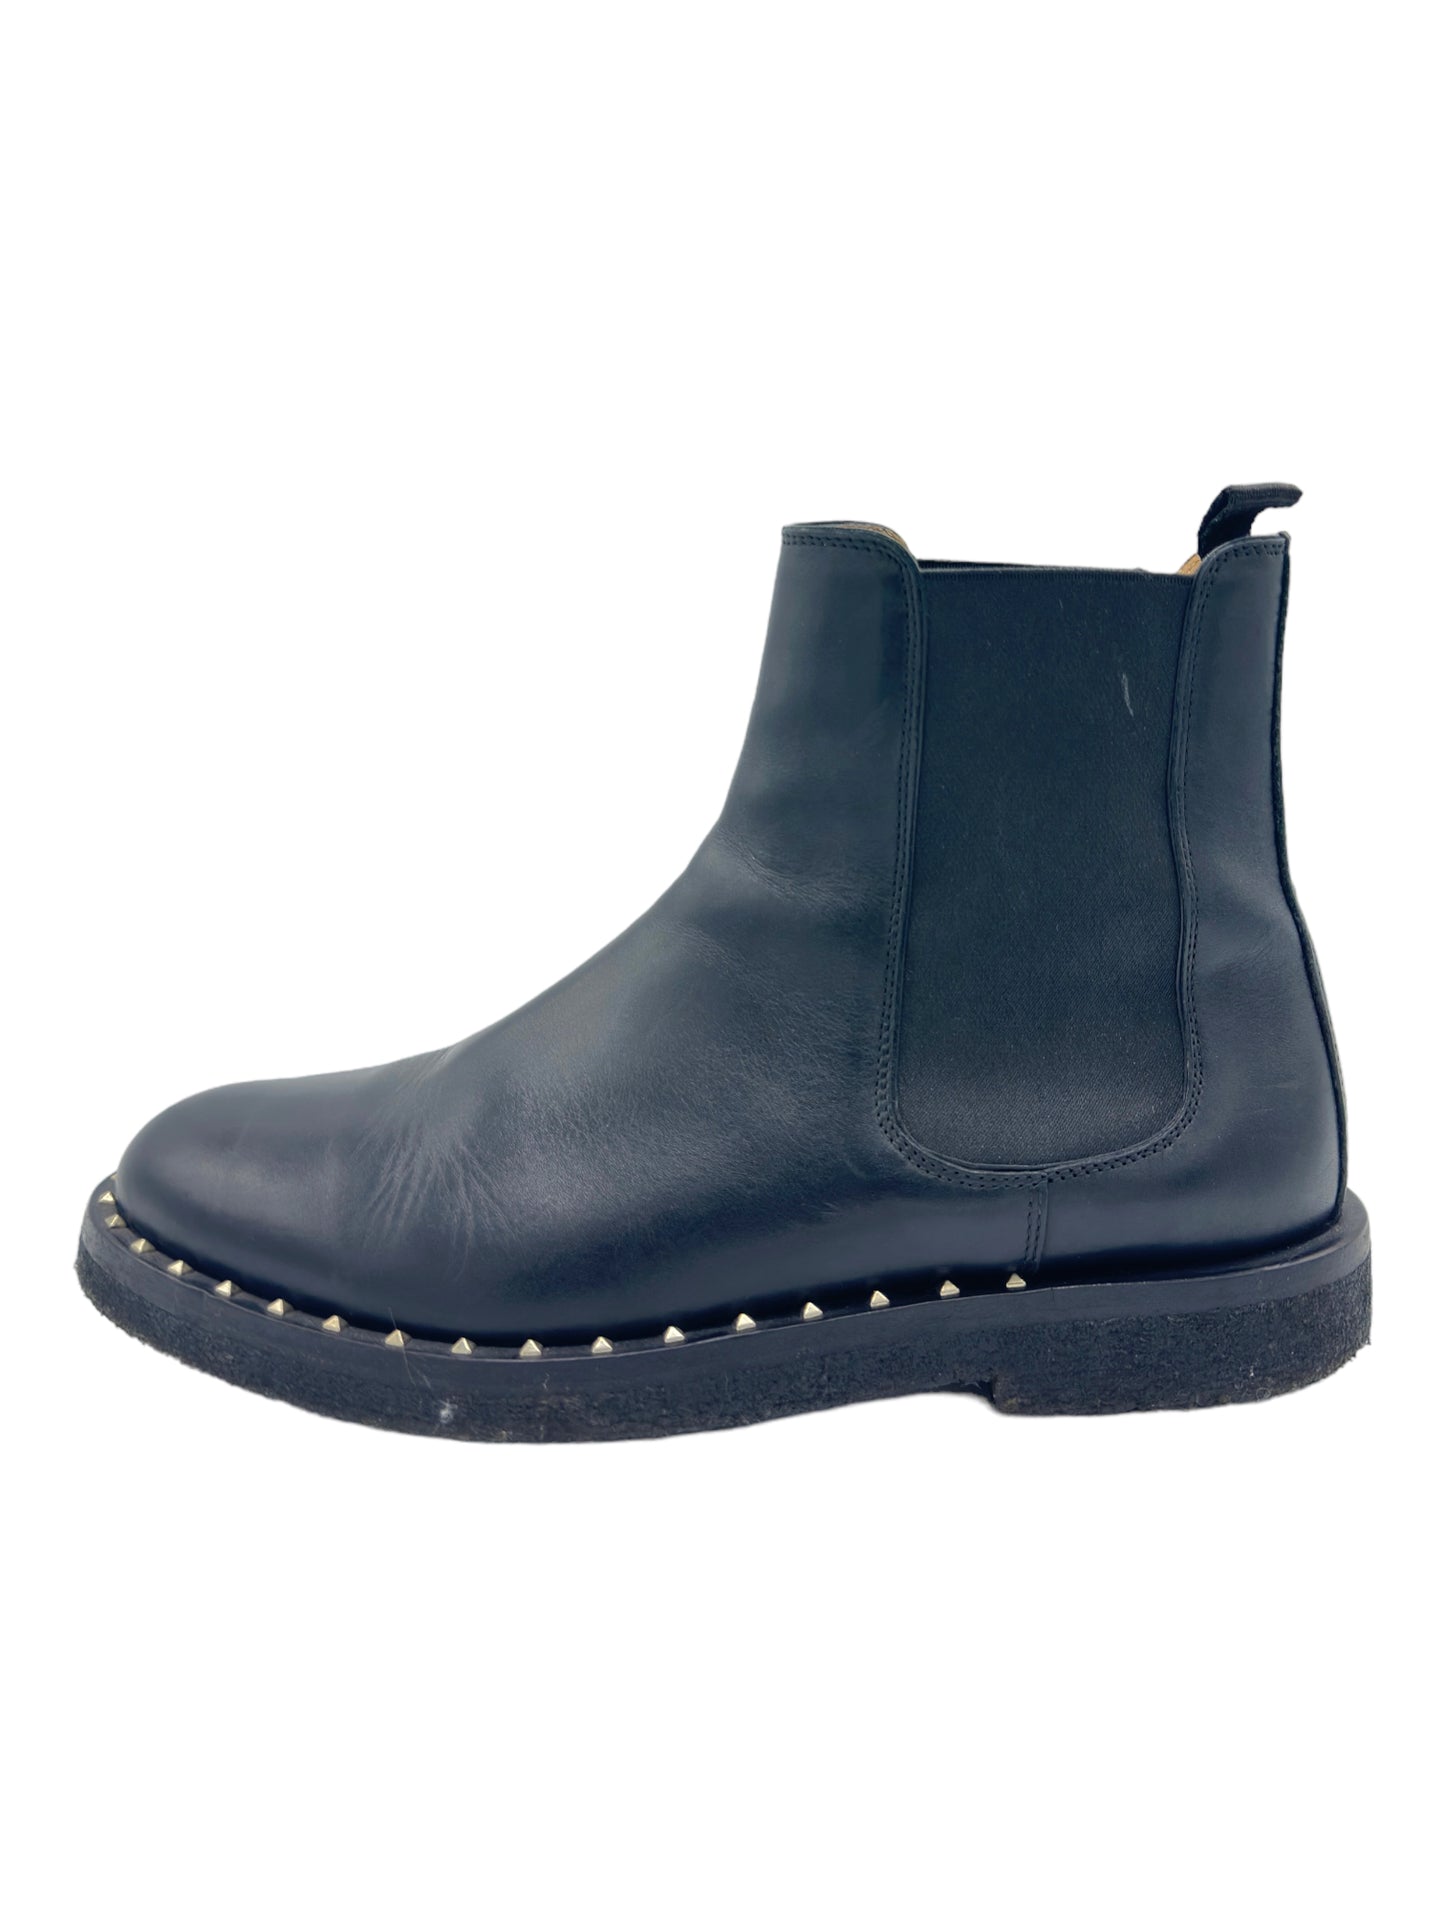 Valentino Black Studded Sole Chelsea Boot